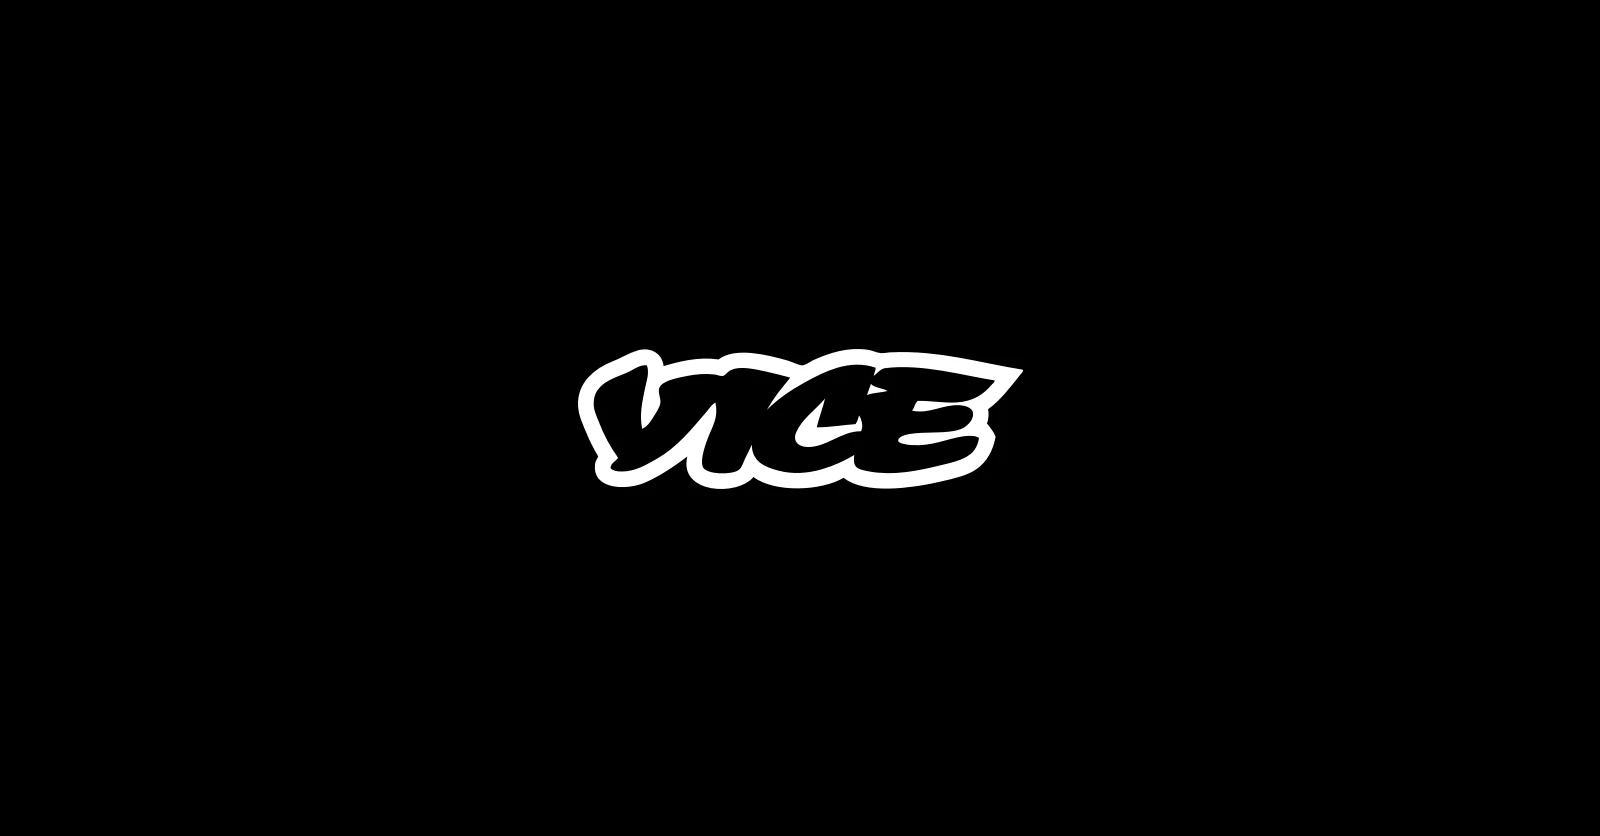 Vice Will Soon Have a New Owner